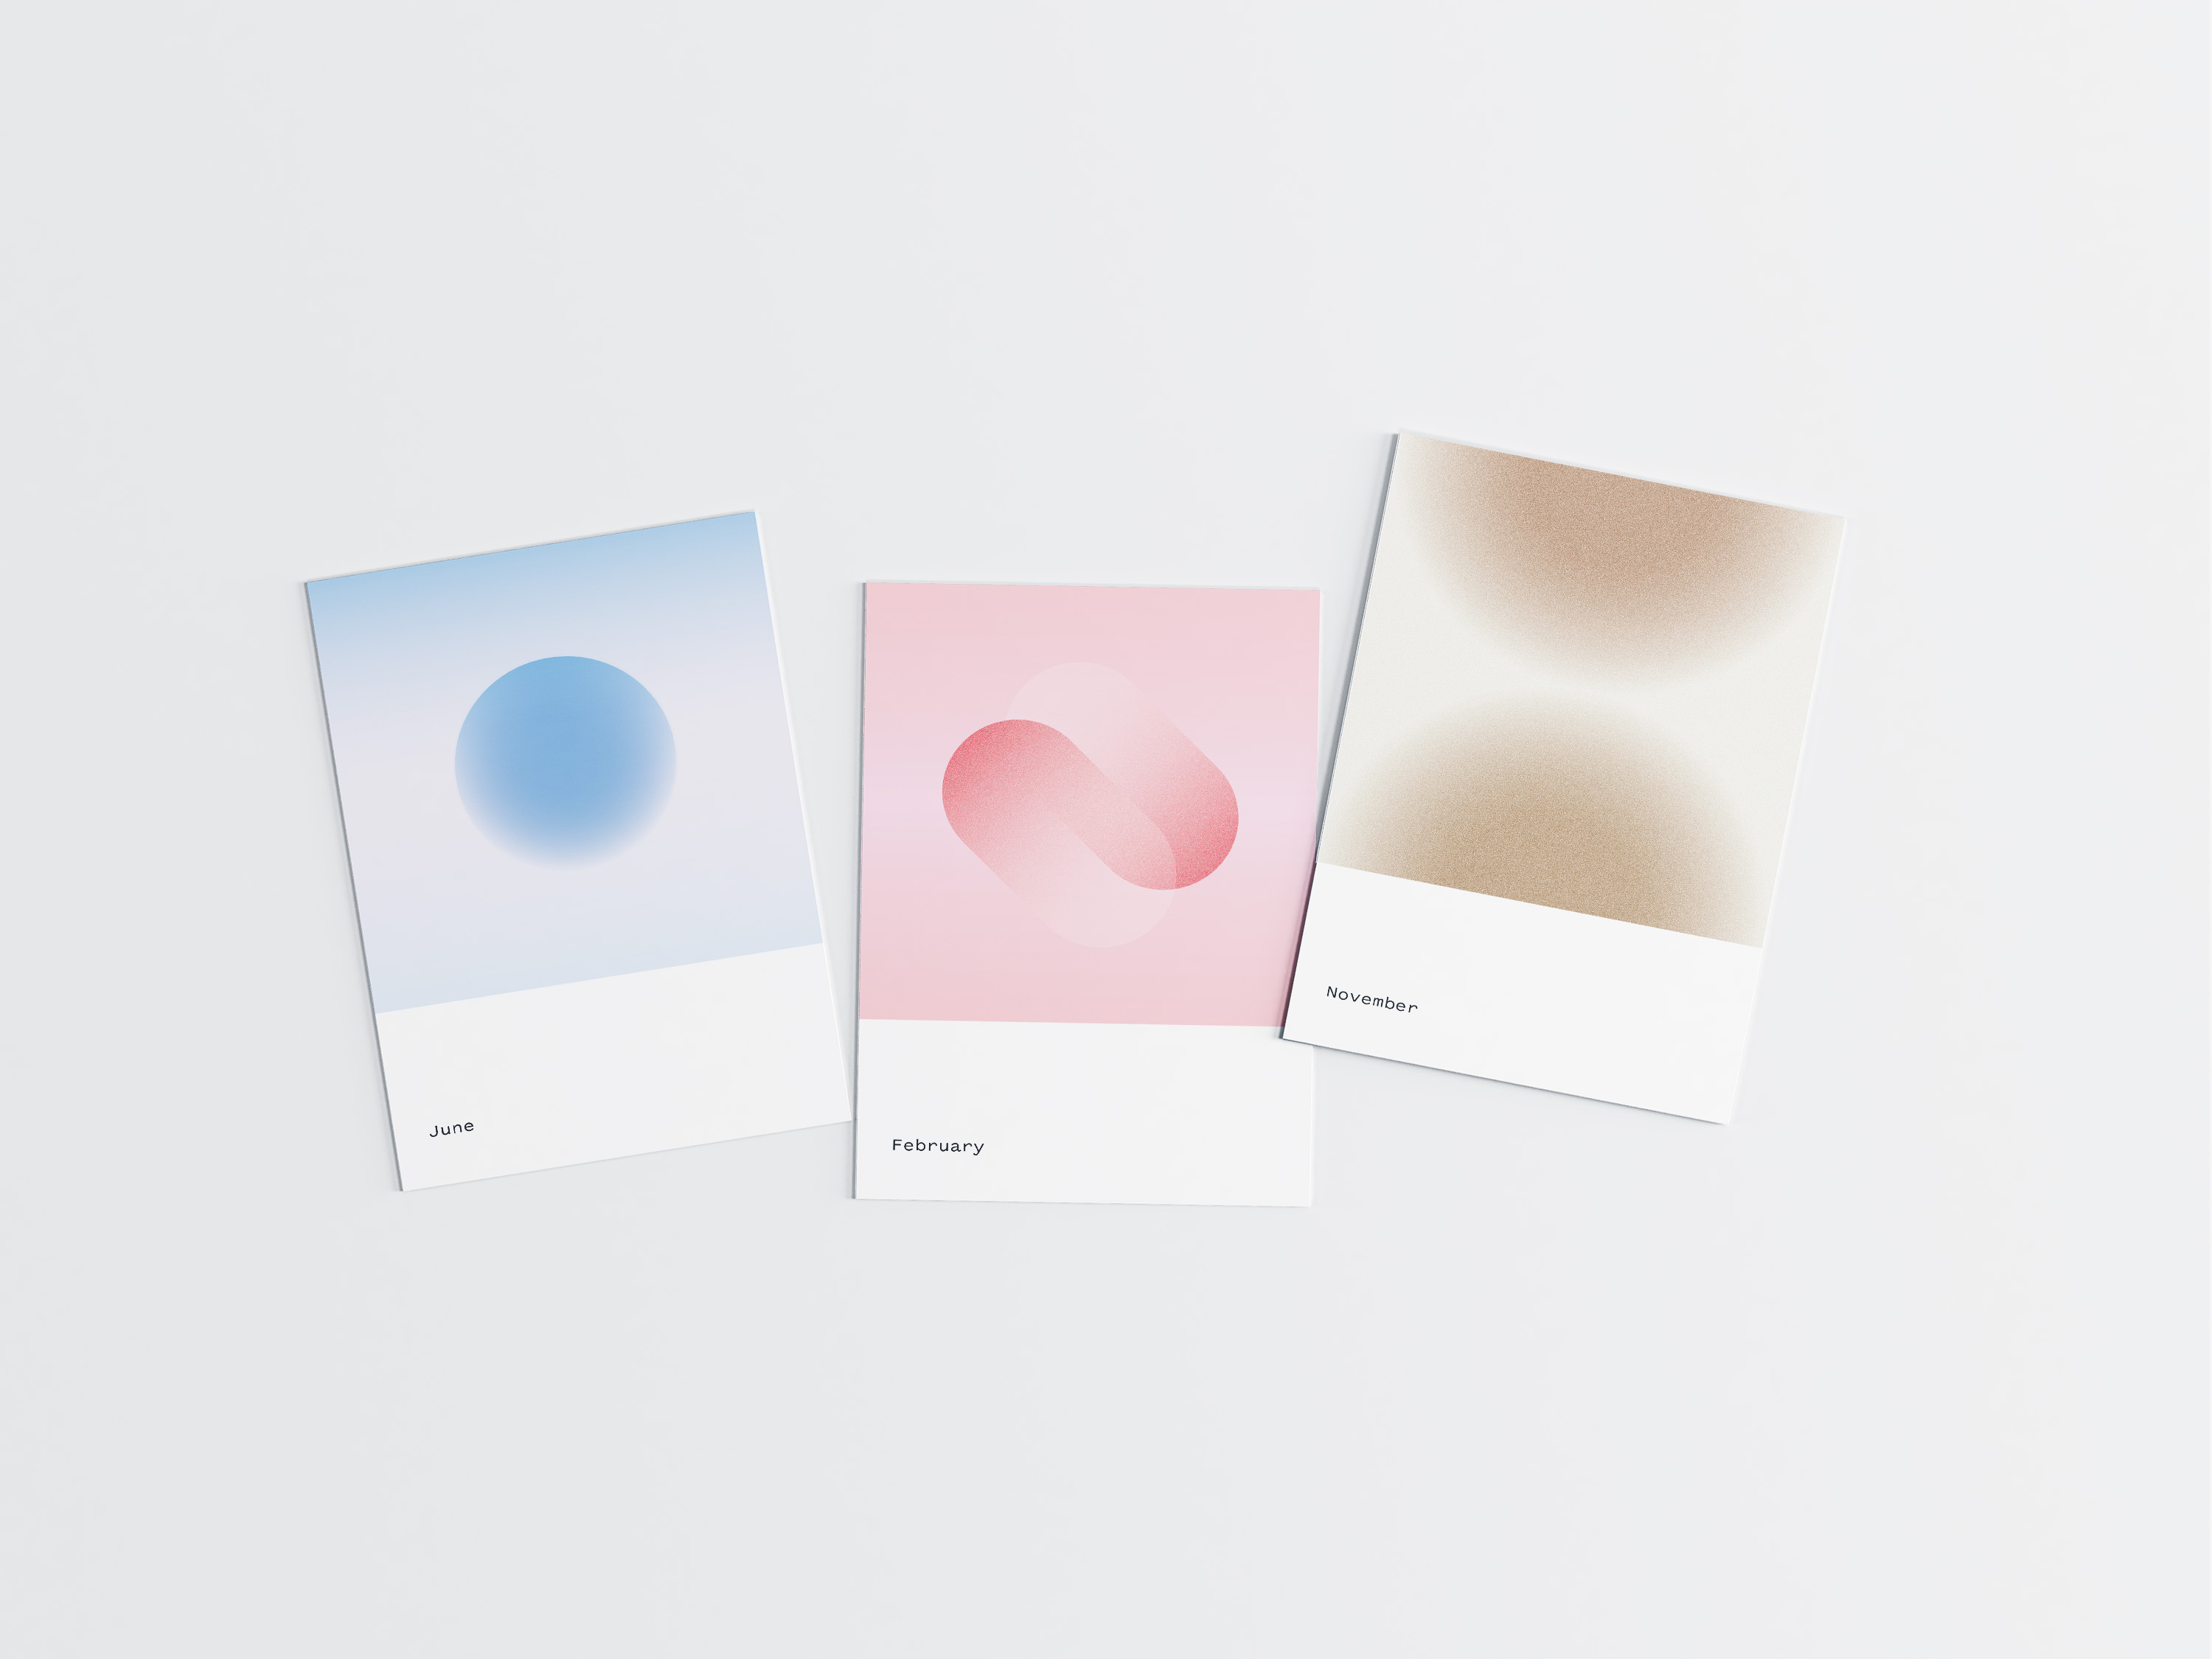 Set of 3 cards with soft gradient graphics laid out flat